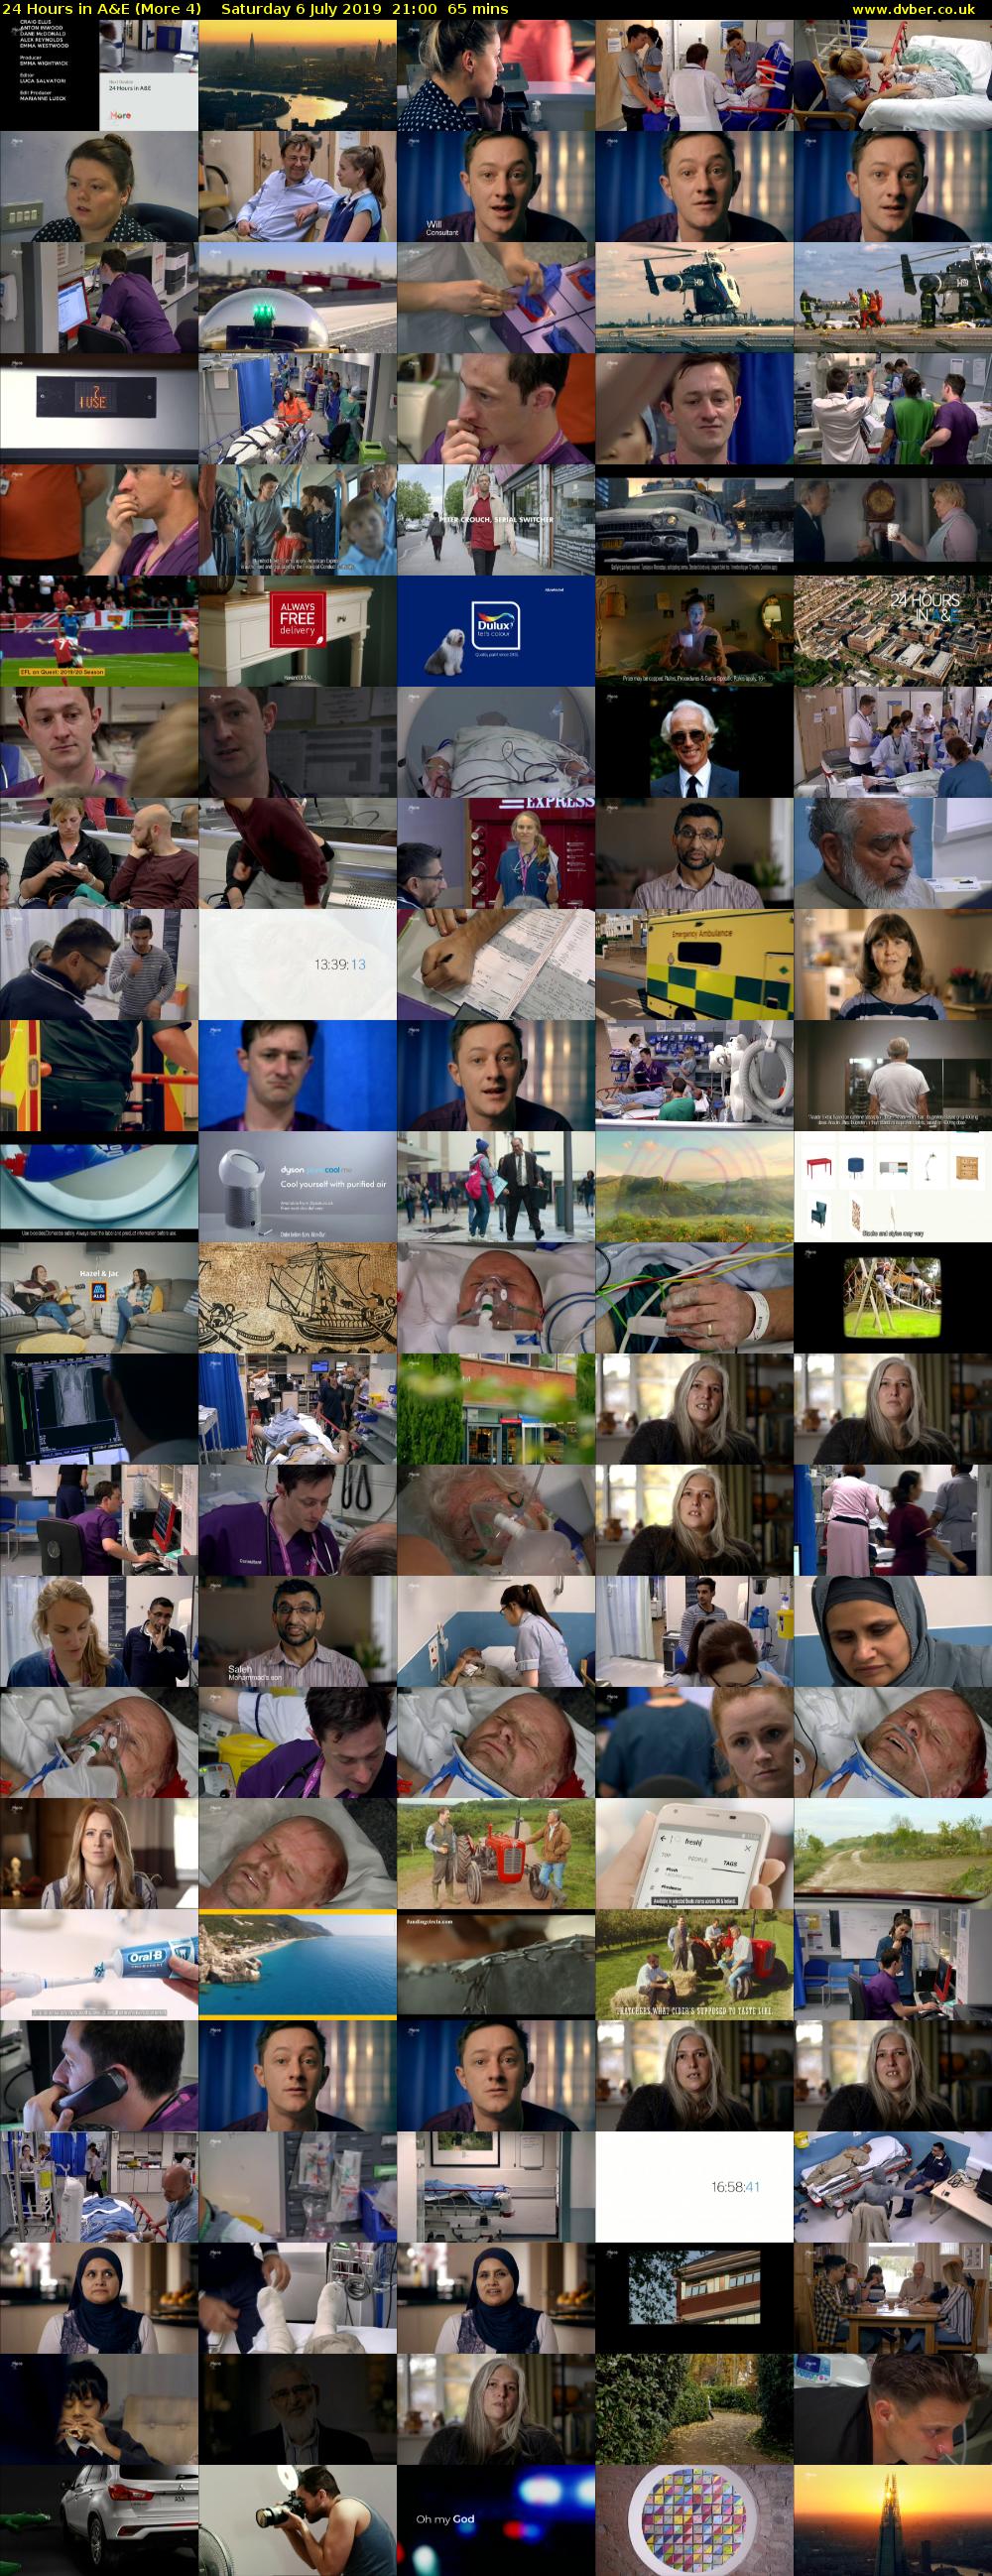 24 Hours in A&E (More 4) Saturday 6 July 2019 21:00 - 22:05